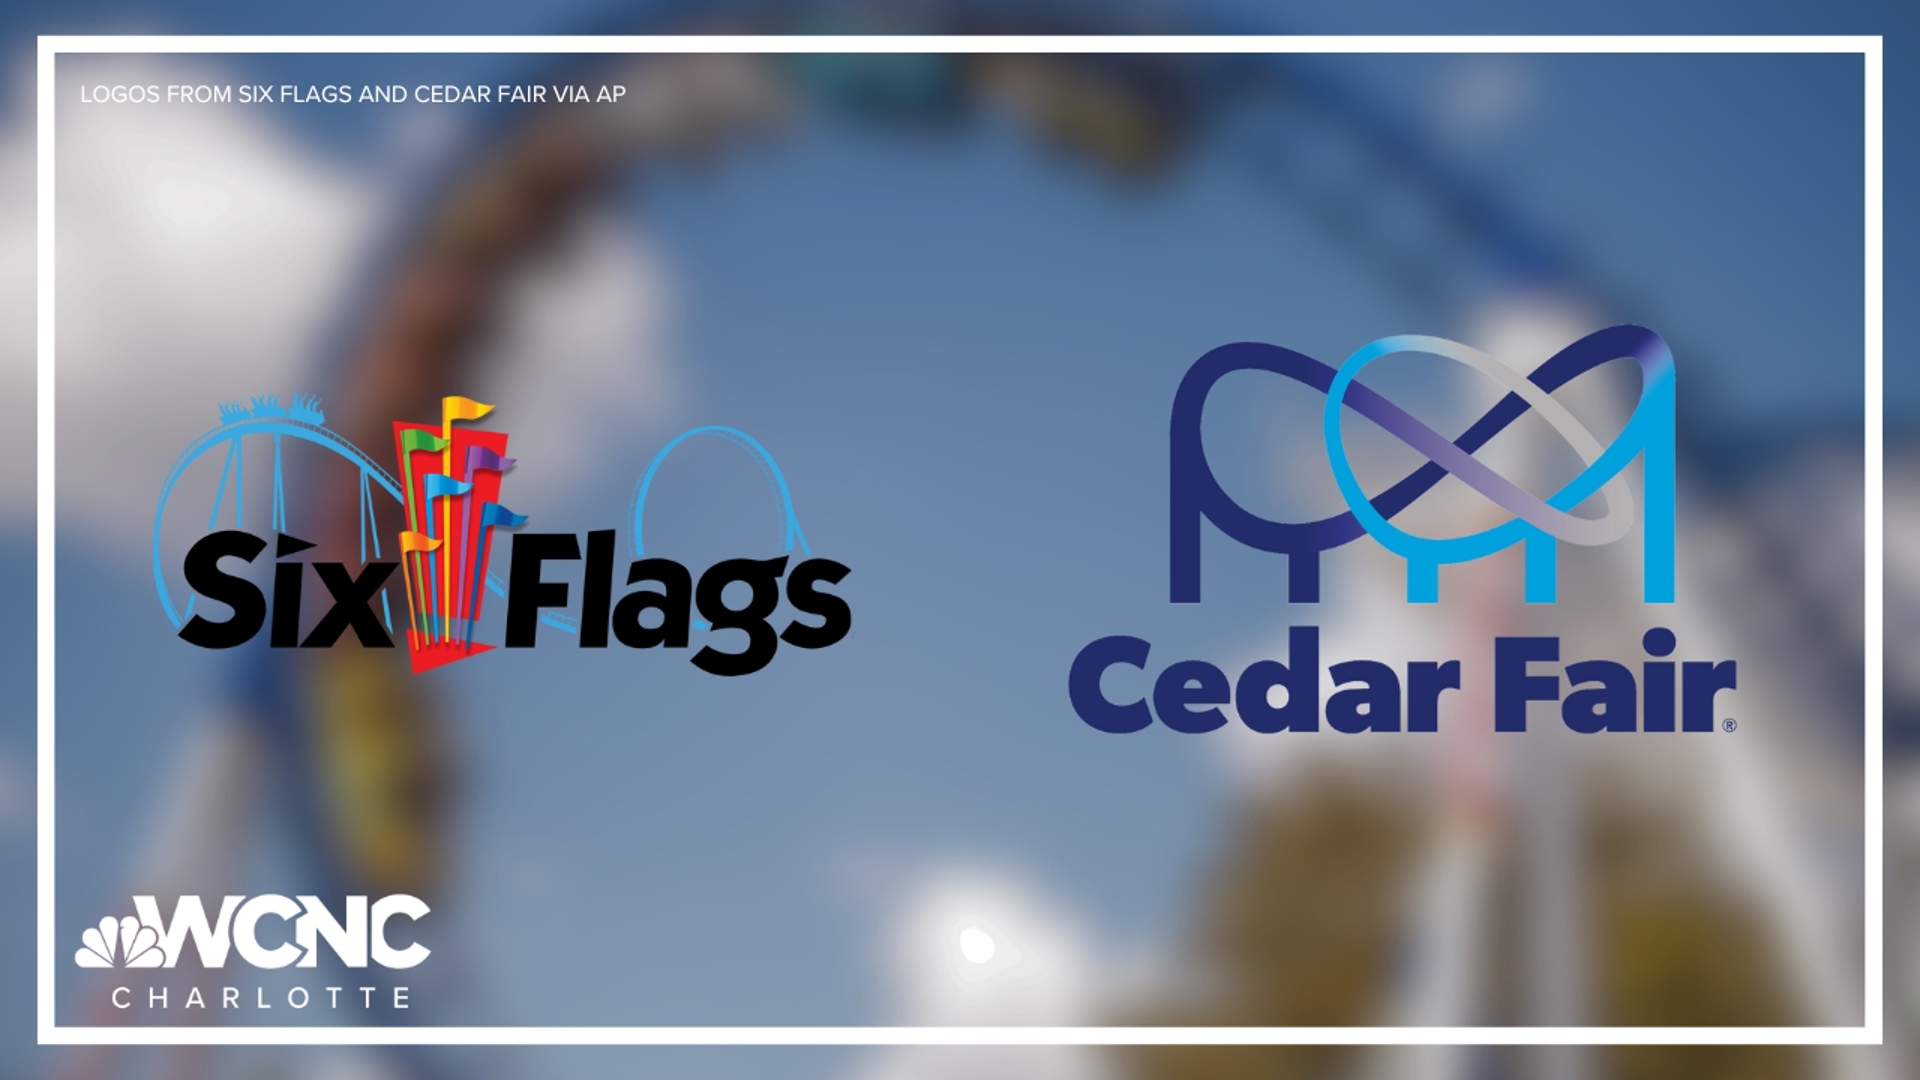 The merger would bring Carowinds into the Six Flags brand.